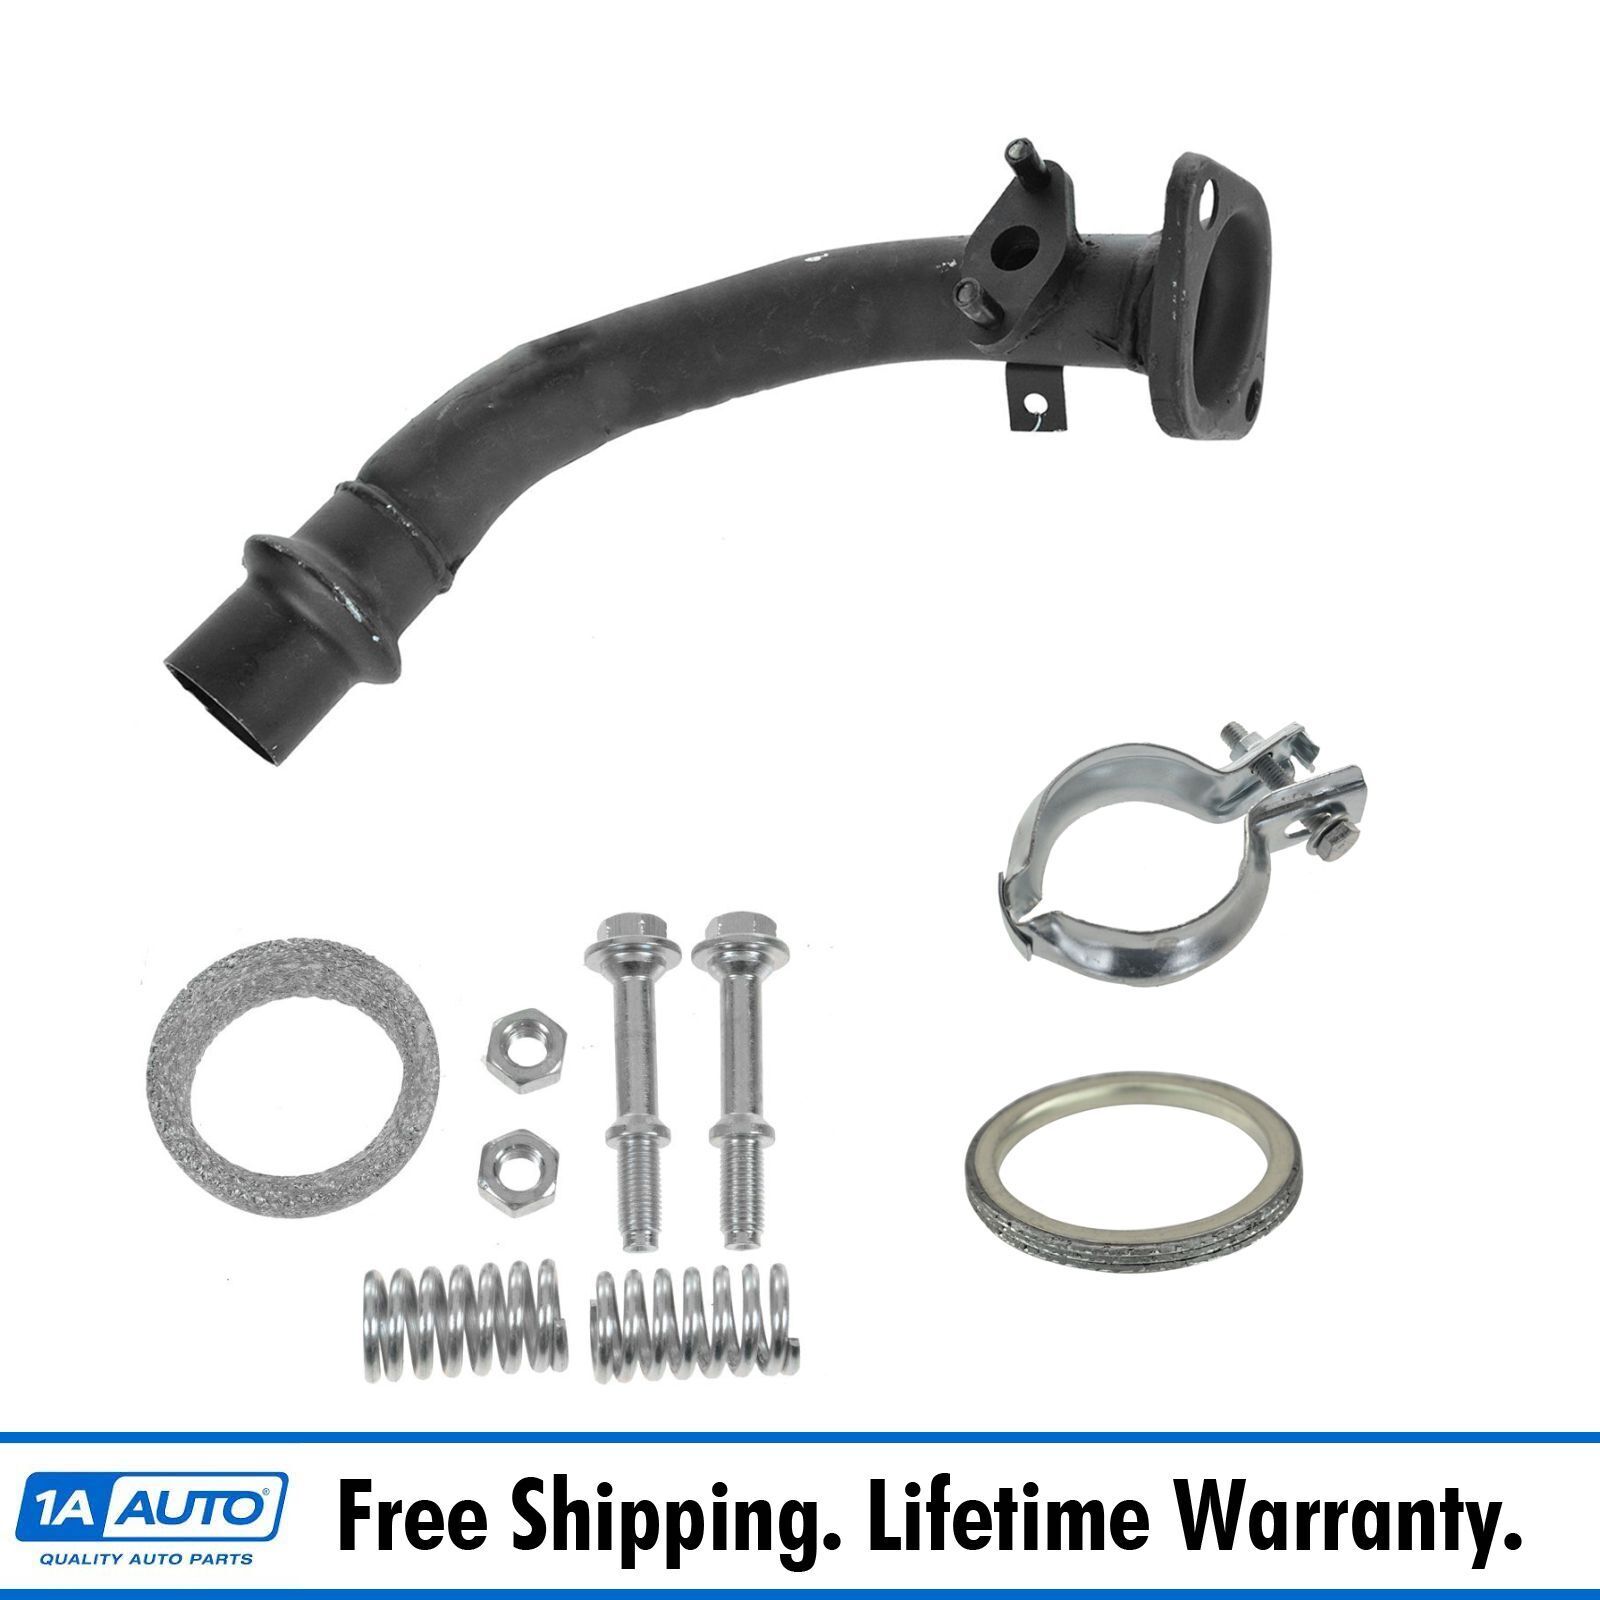 Front Exhaust Pipe with Clamp Gasket Hardware for 98-01 Prizm Corolla 1.8L